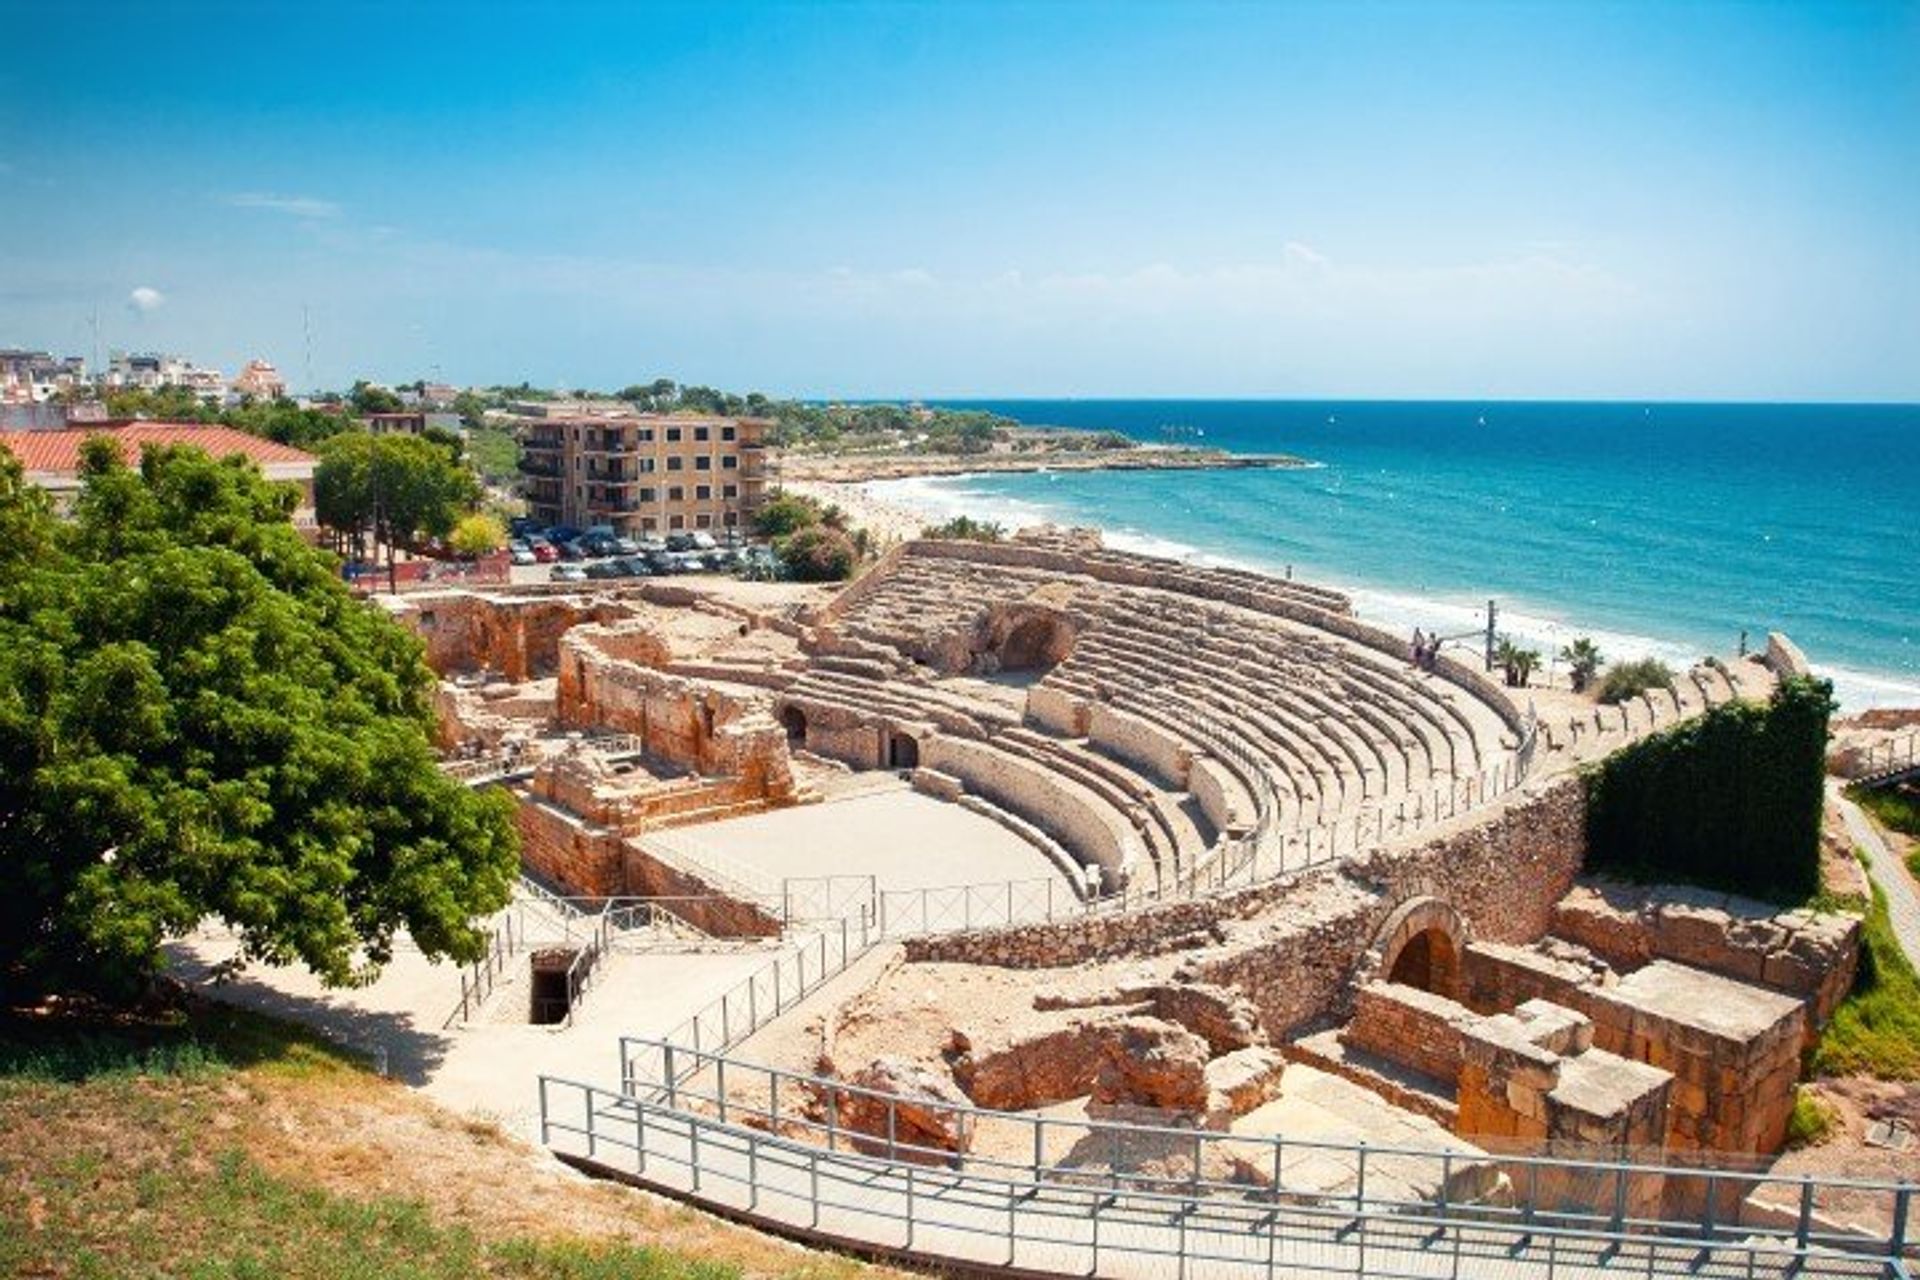 The Roman amphitheatre in Tarragona, once used for gladiatorial games